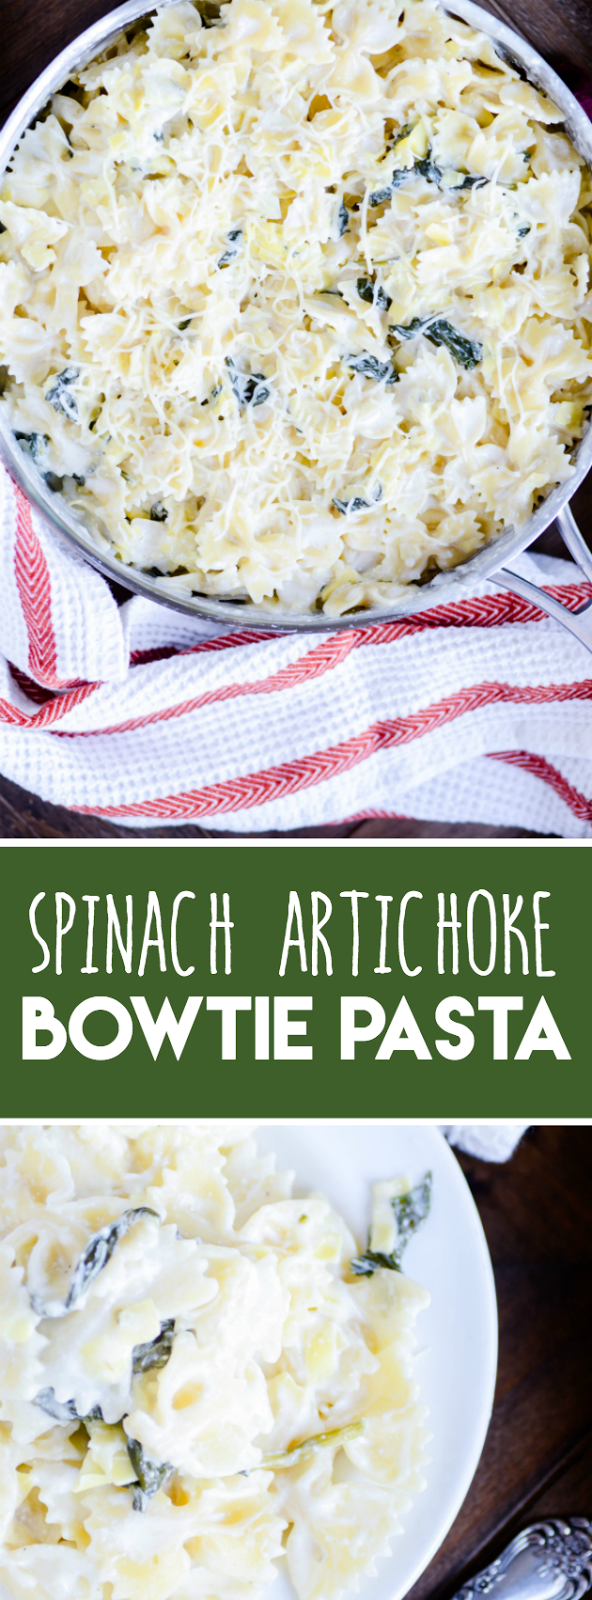 If you love spinach artichoke dip, this is the pasta for you It's your favorite appetizer made into dinner! 